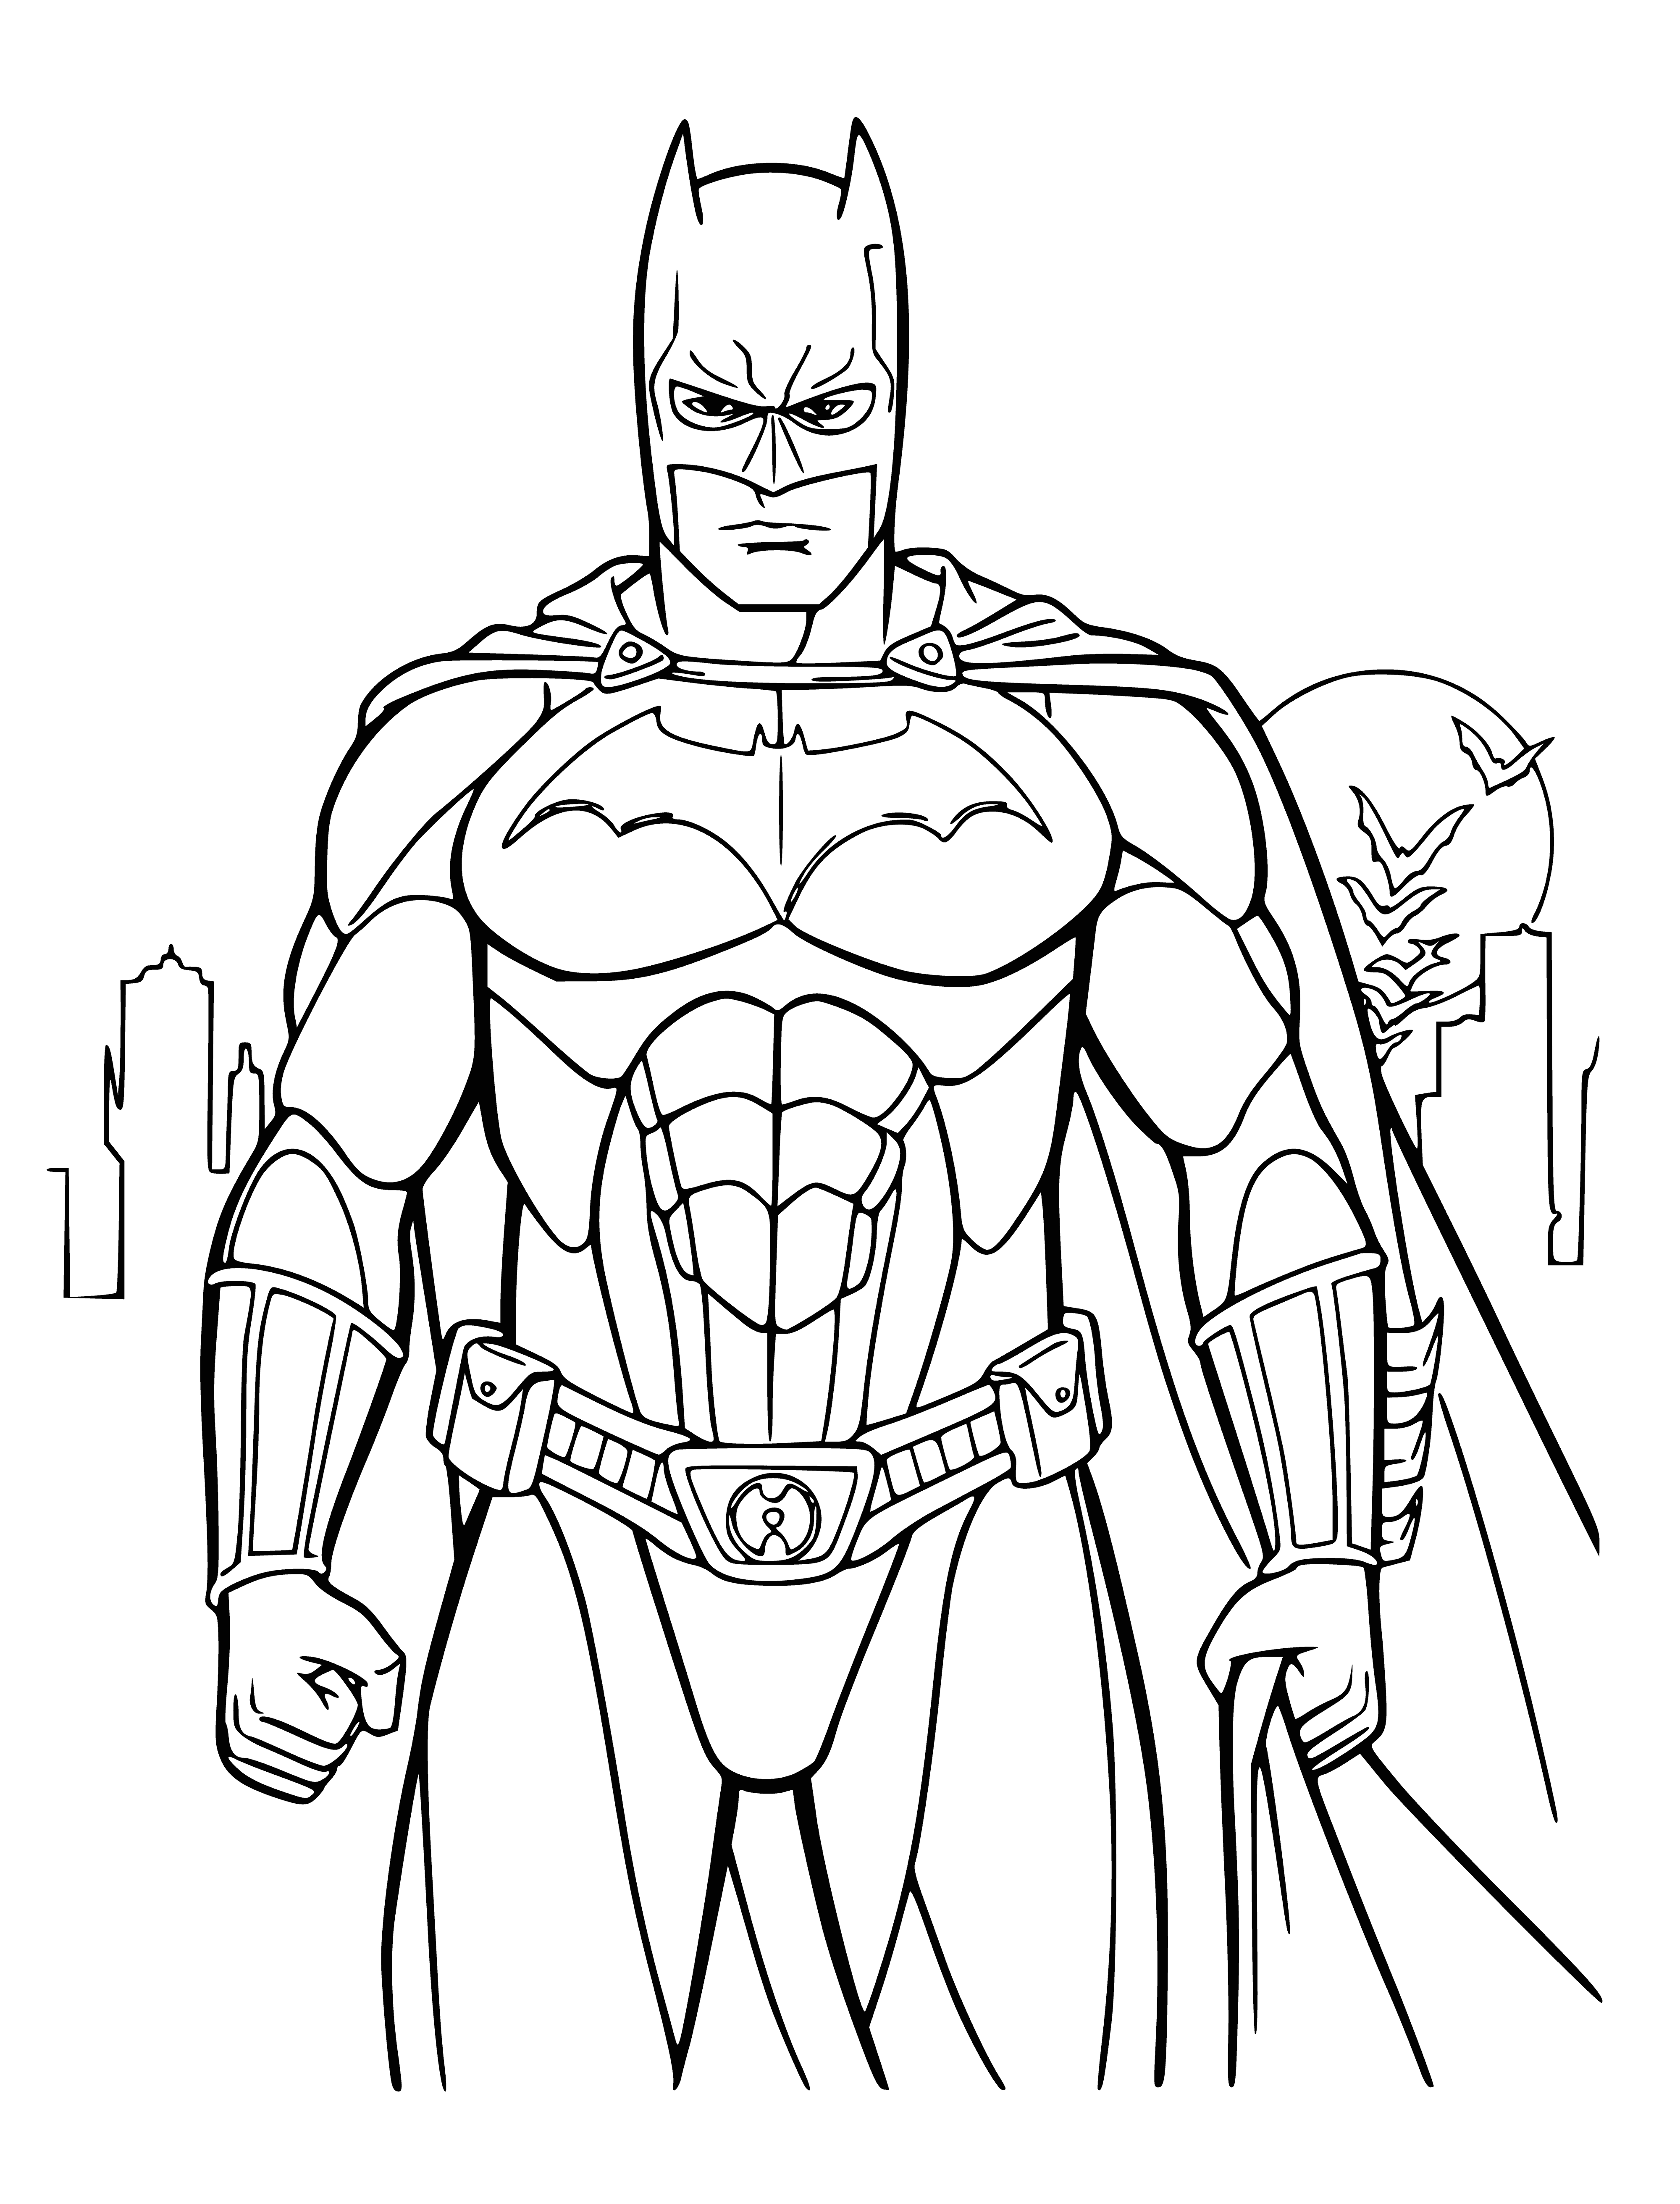 coloring page: Dark-cloaked figure in shadows stands on a rooftop, city skyline behind and the Bat-Signal shining in the distance.